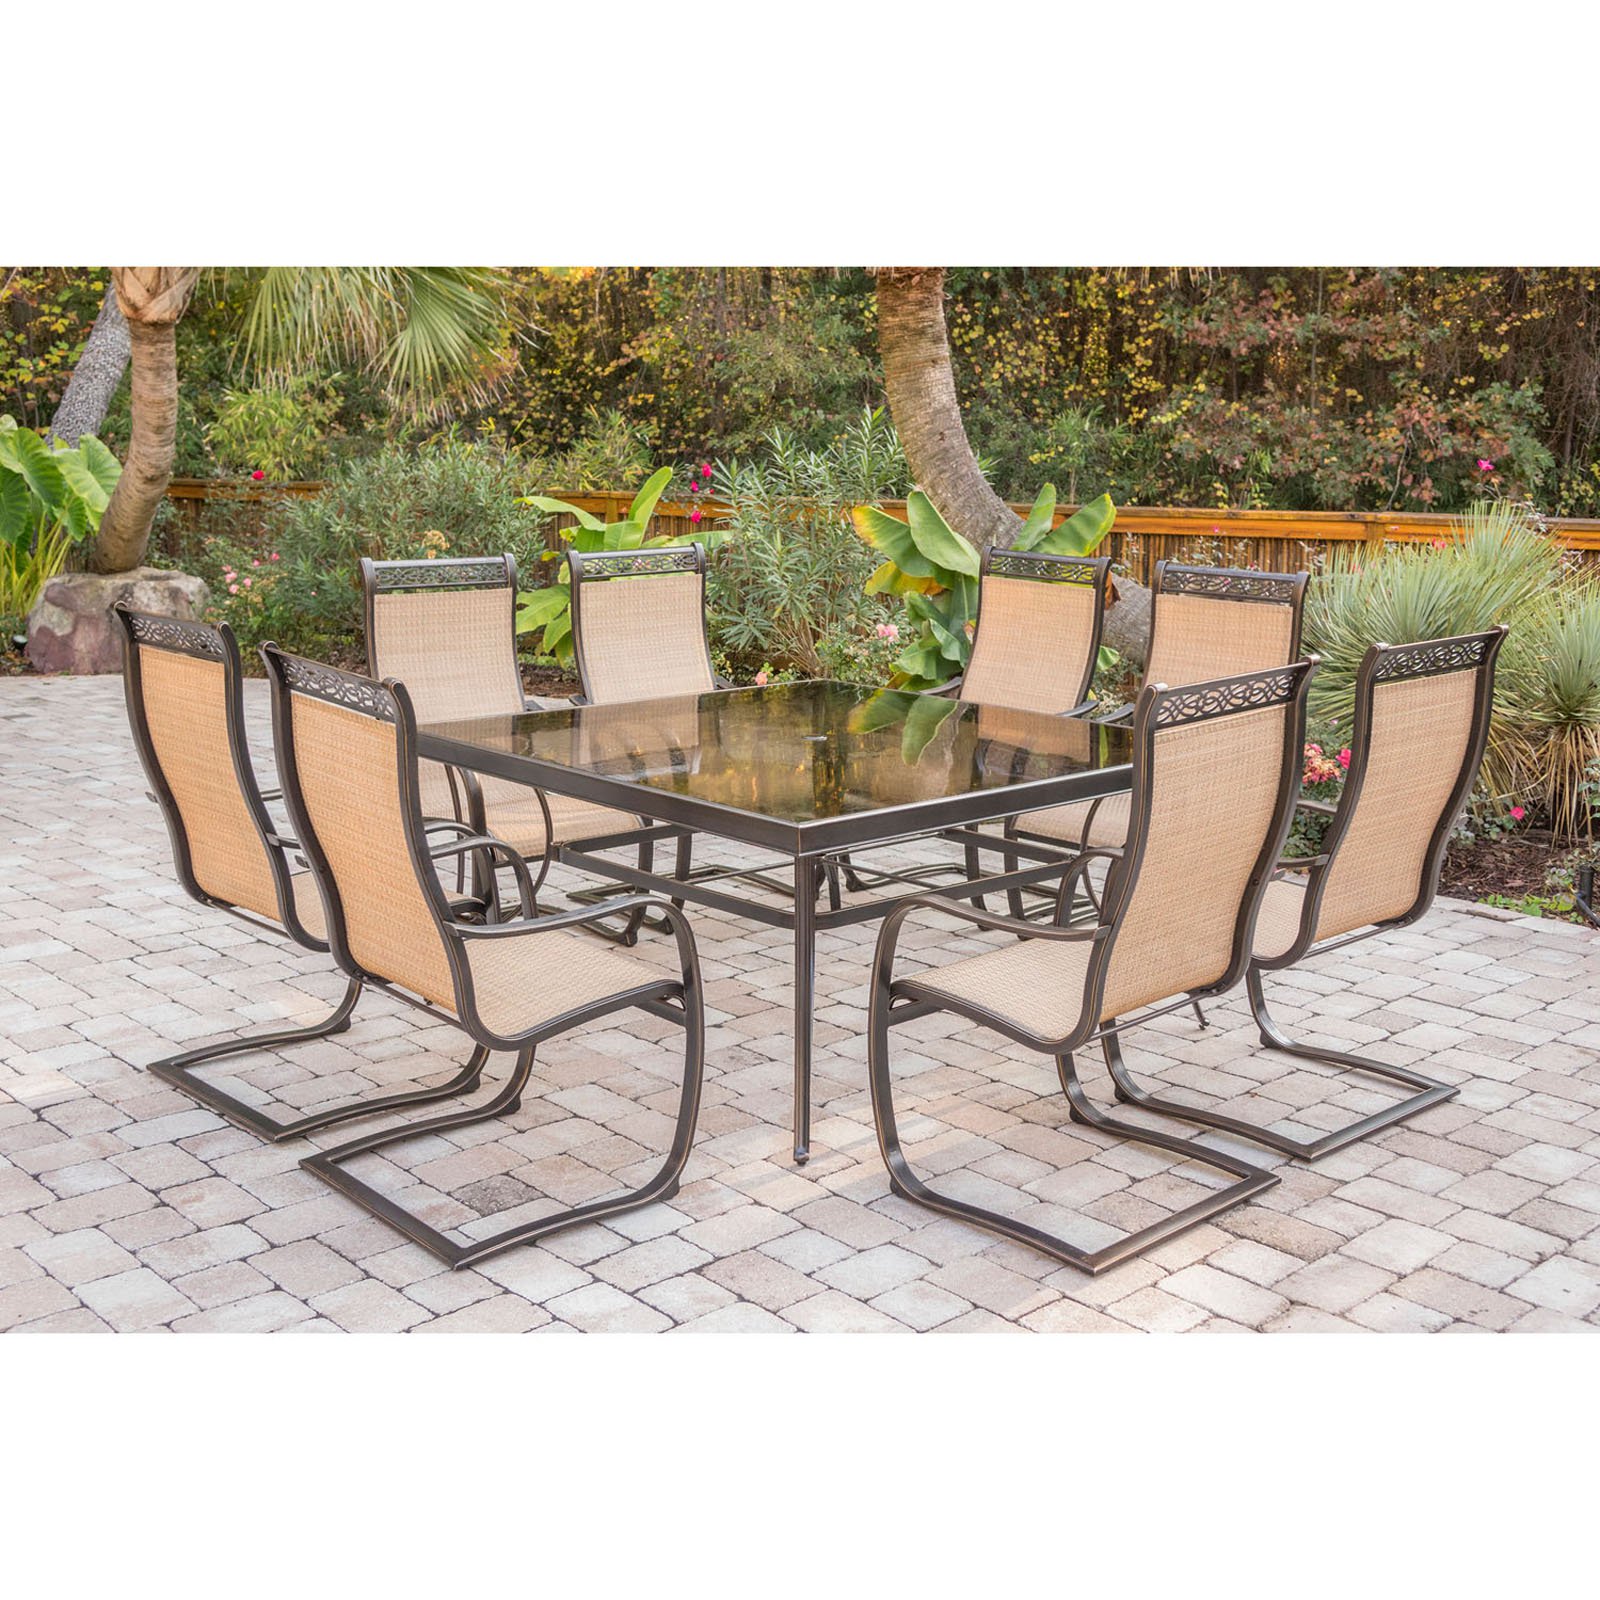 Hanover Monaco 9-Piece Rust-Free Aluminum Outdoor Patio Dining Set with 8 PVC Dining Chairs and Tempered Glass Square Dining Table, MONDN9PCSQG - image 1 of 8